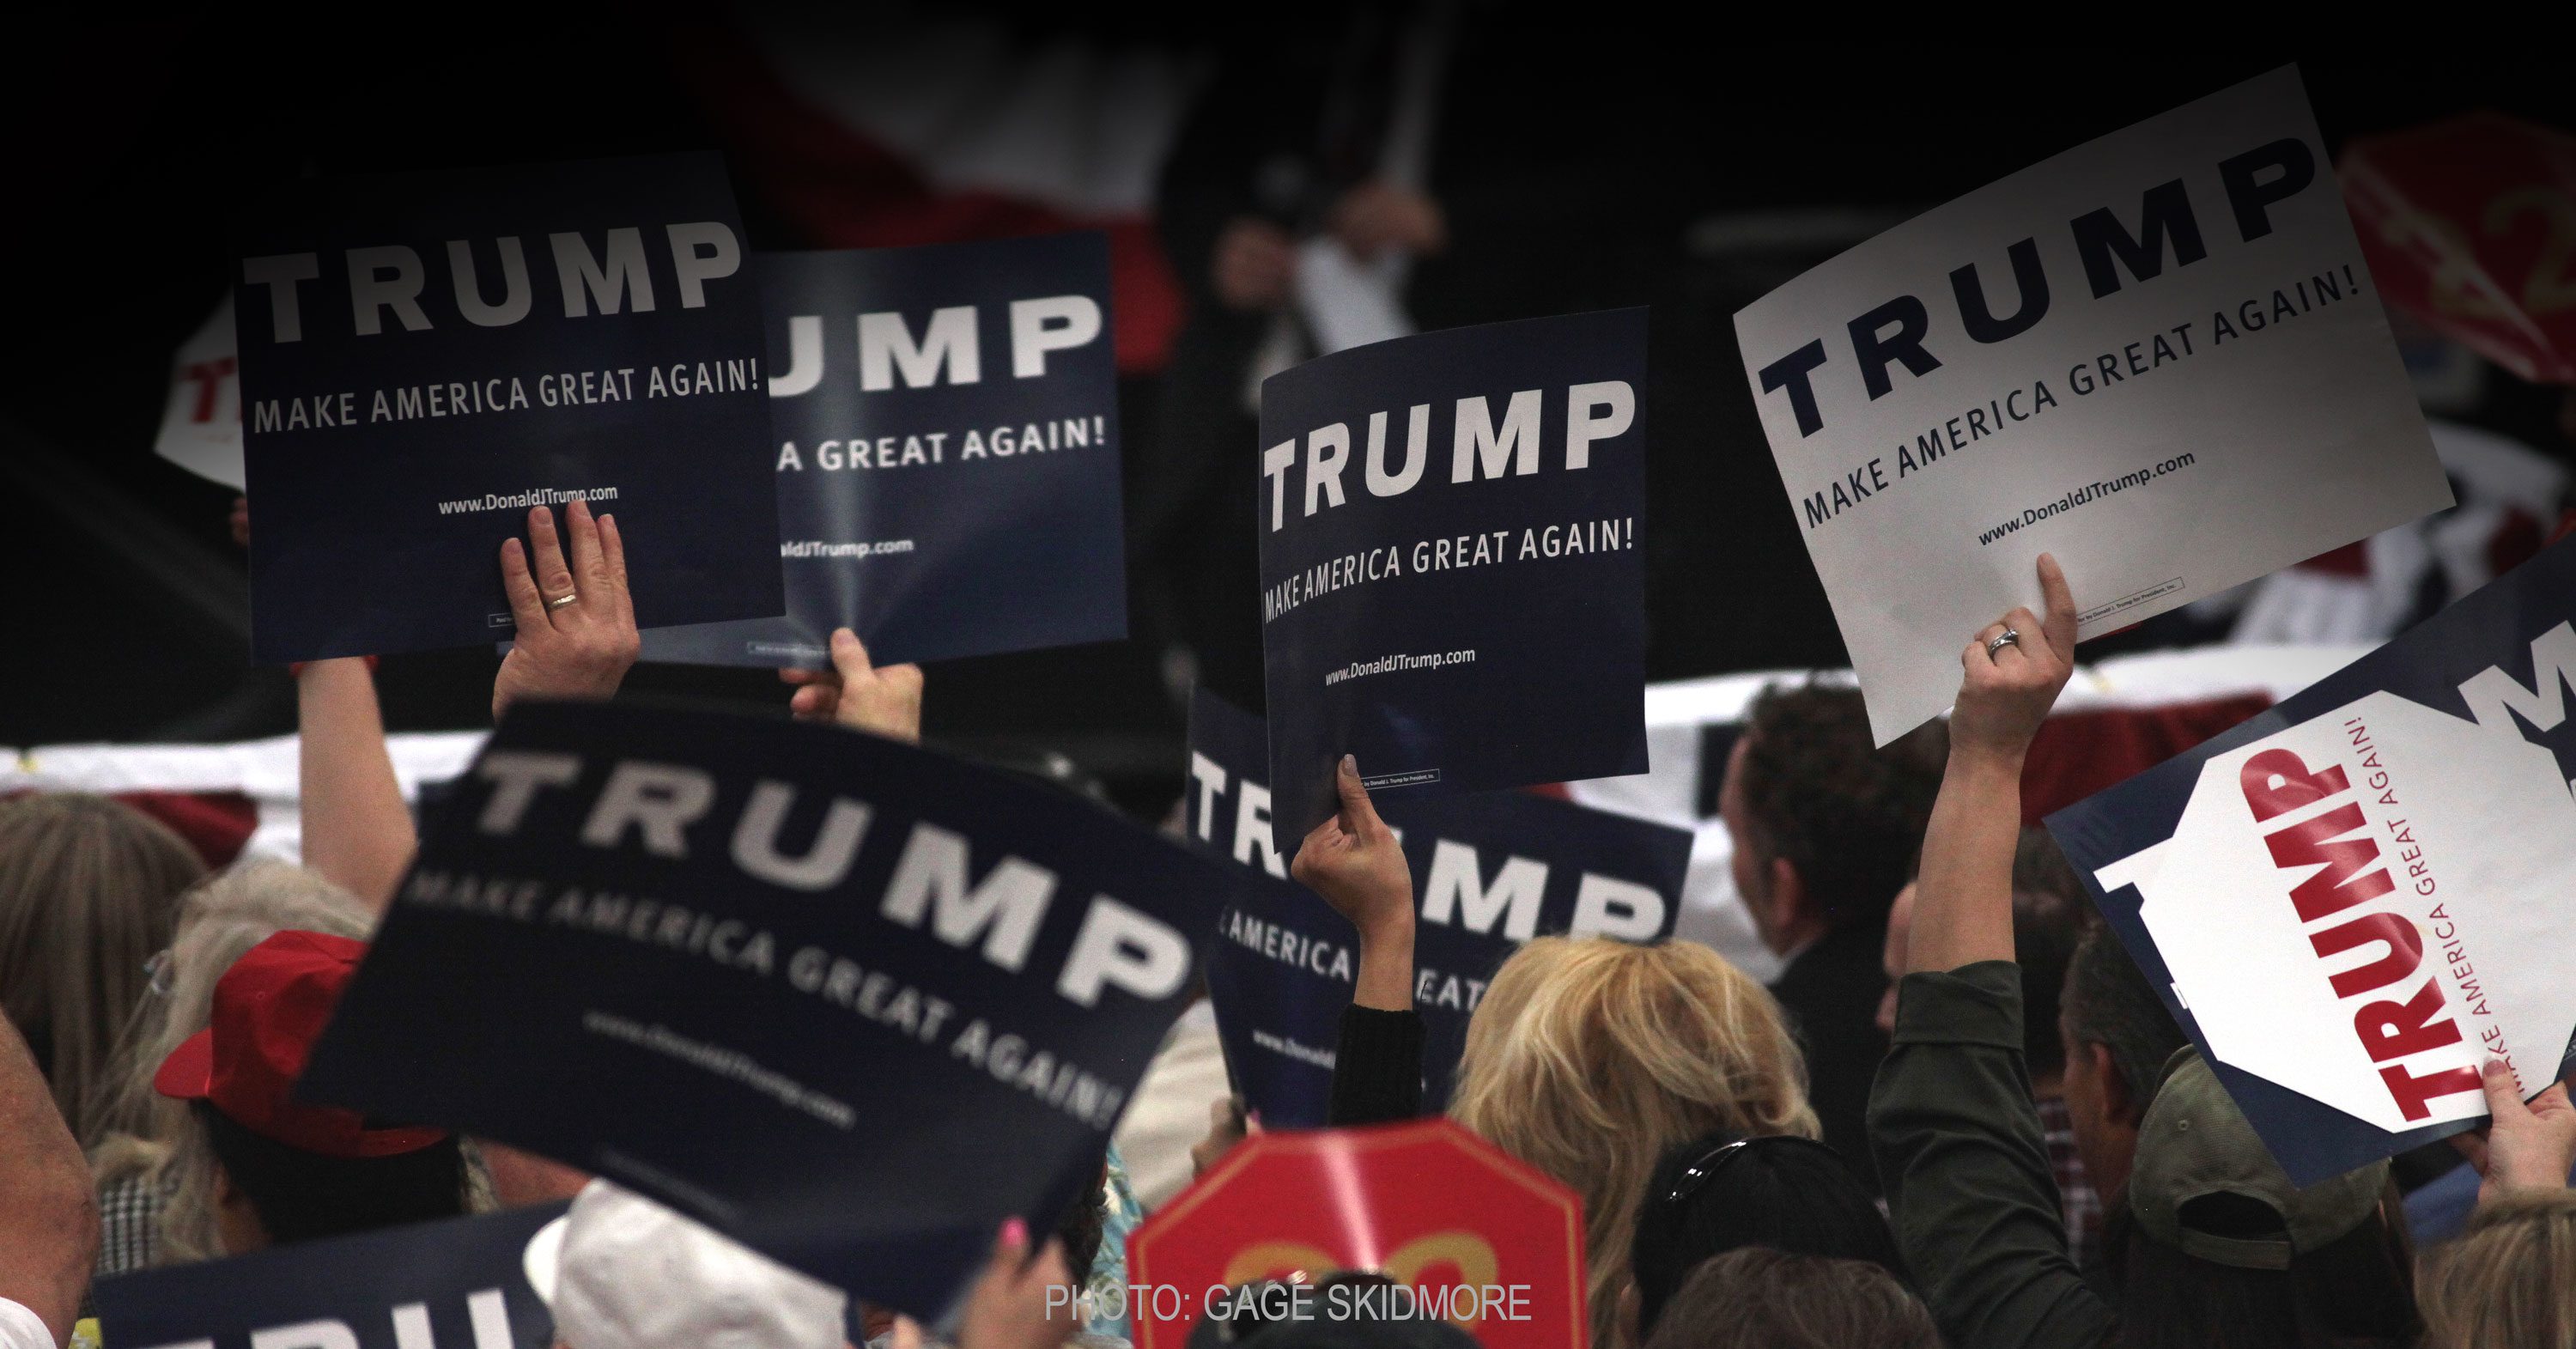 Trump Signs at a Rally by Gage Skidmore